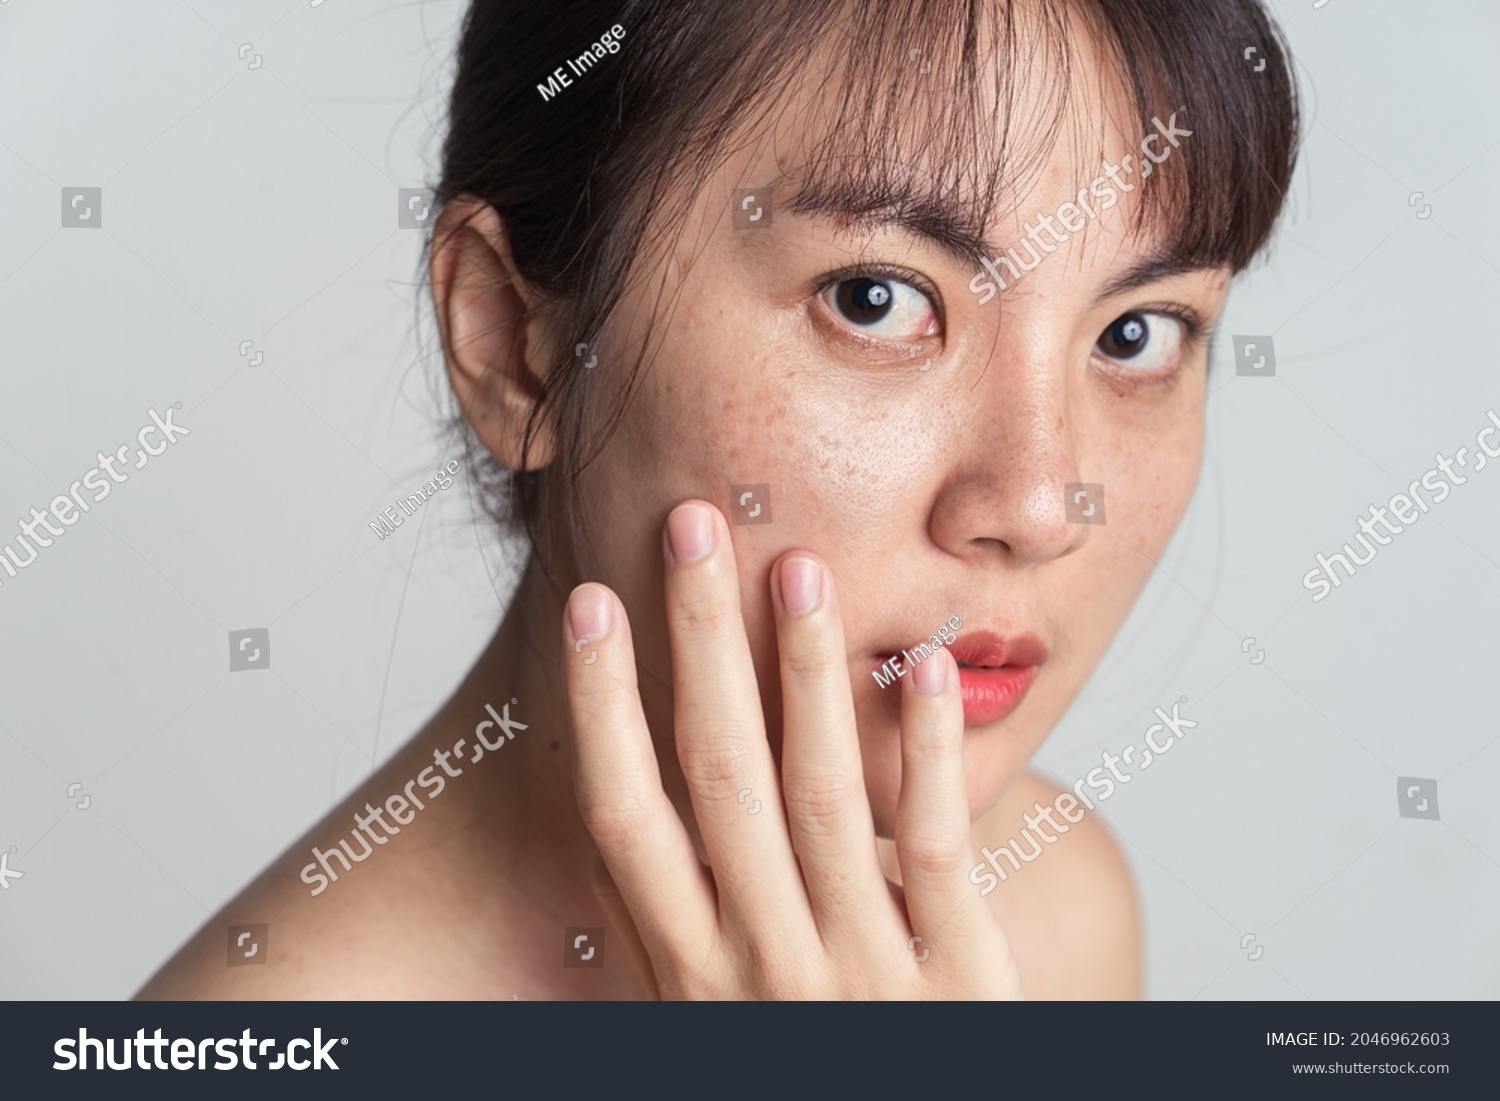 Young Asian woman worry with freckle on face and hand gently touching cheek applying skincare cosmetics treatment. #2046962603